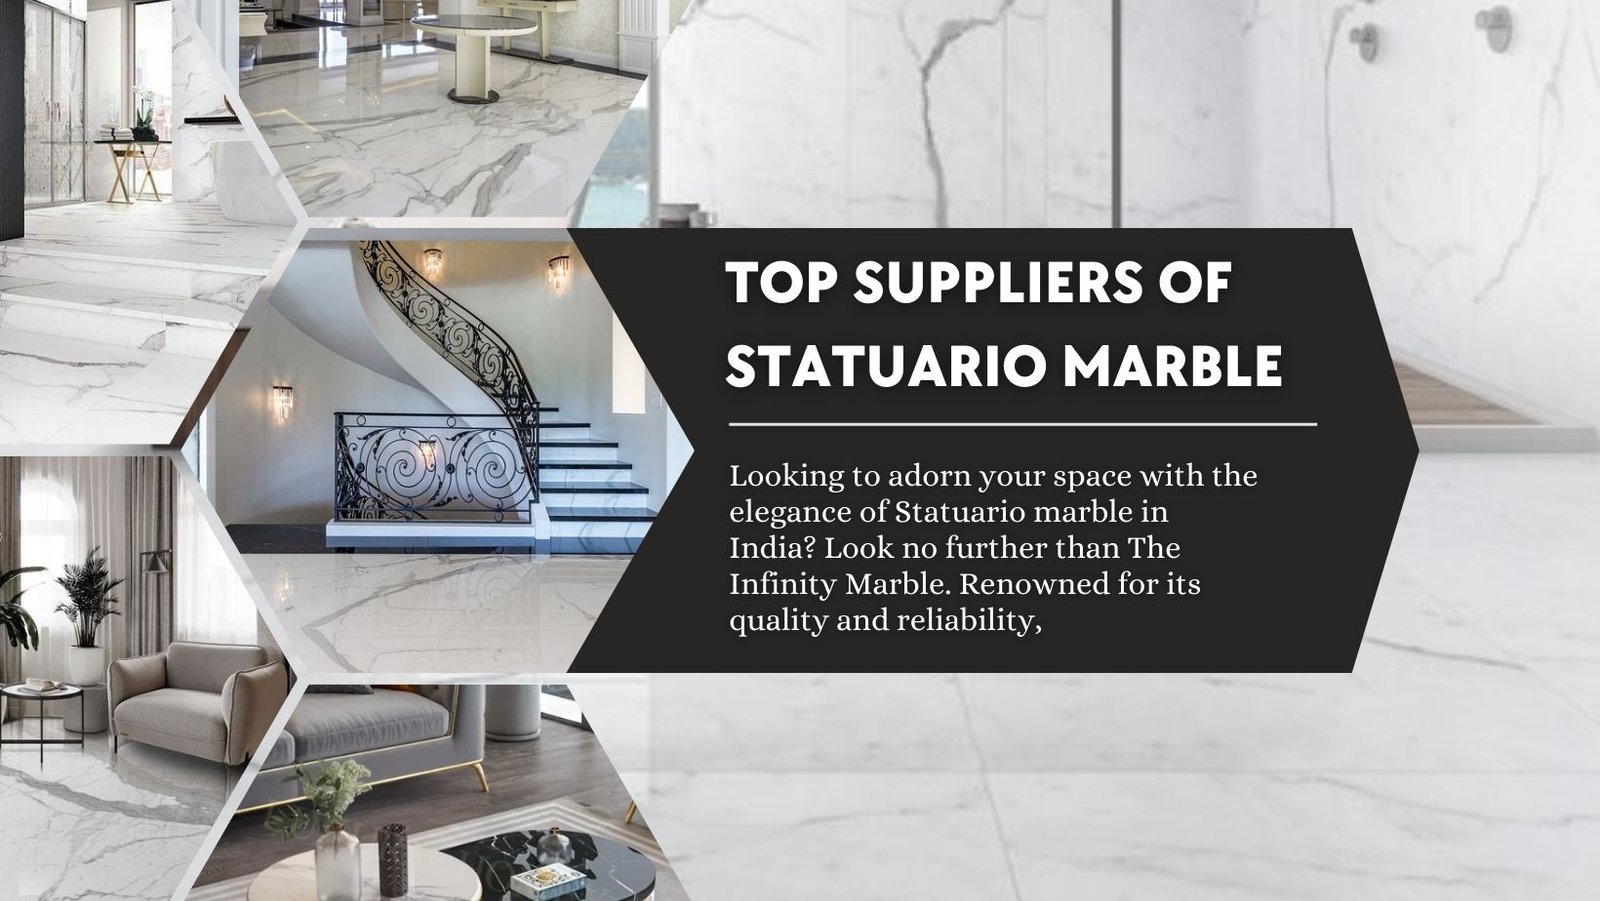 Top Suppliers of Statuario Marble in India